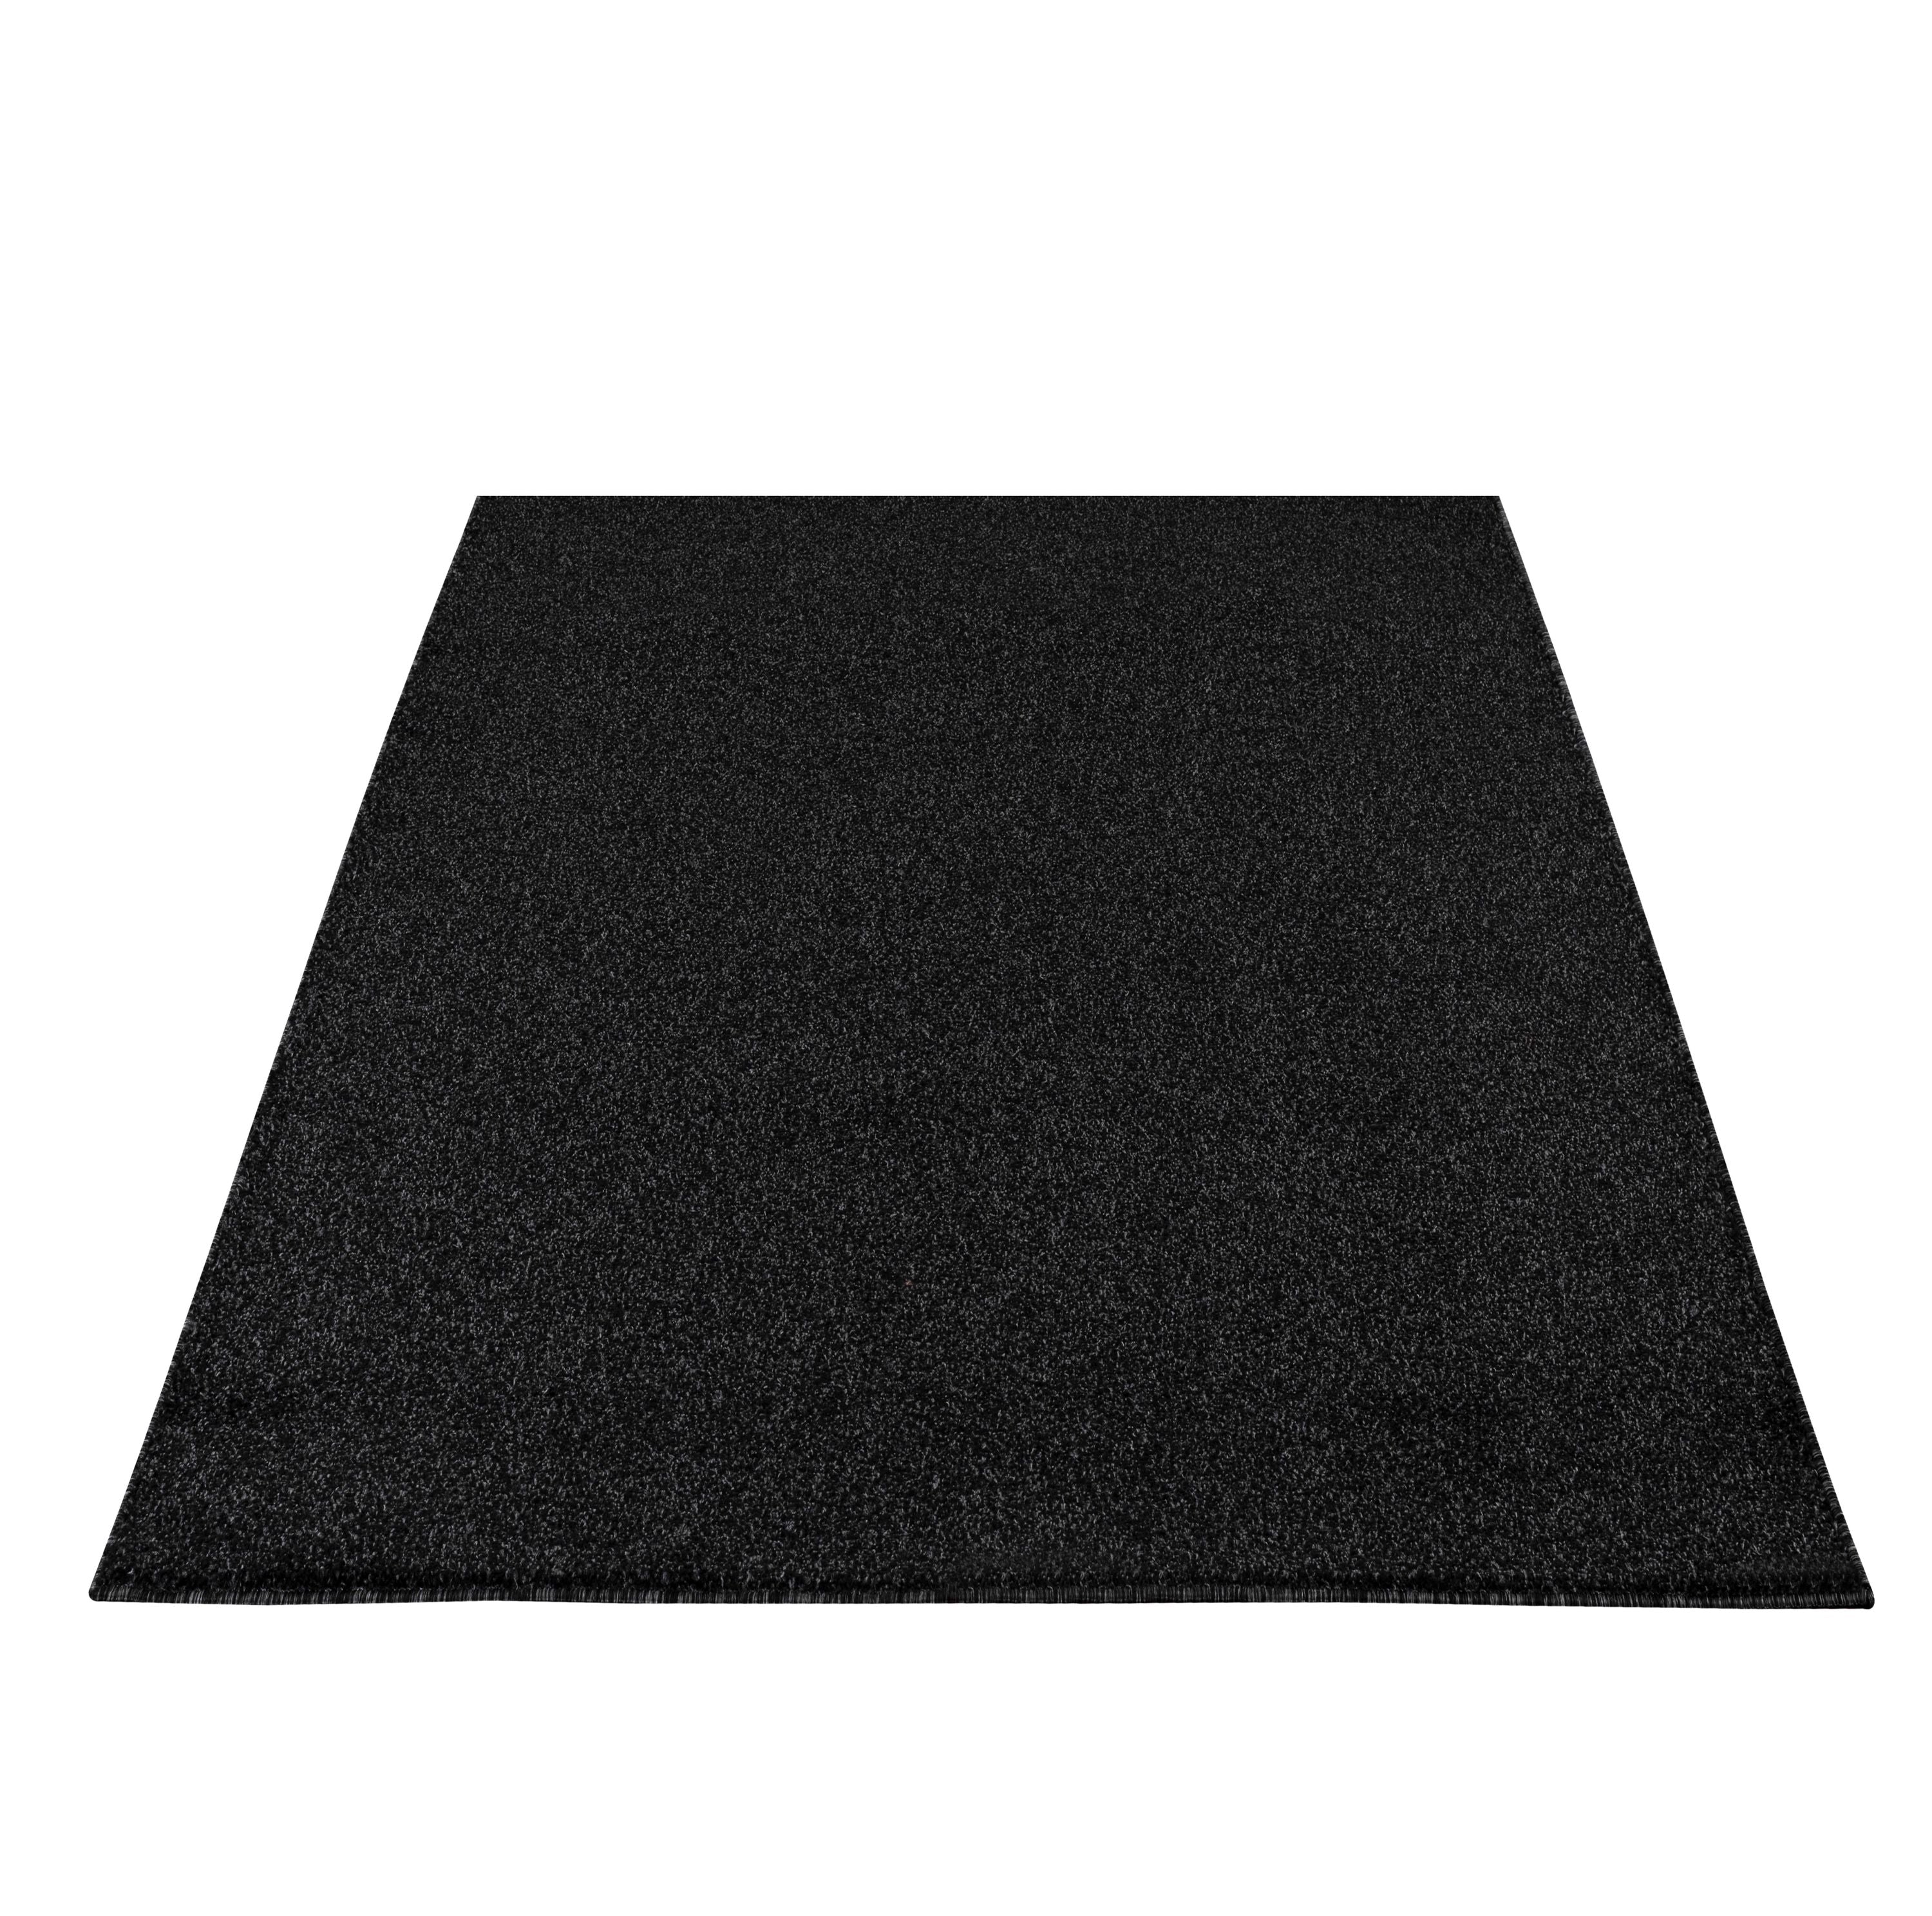 Plain short pile rug for living room, super soft, various colors and sizes